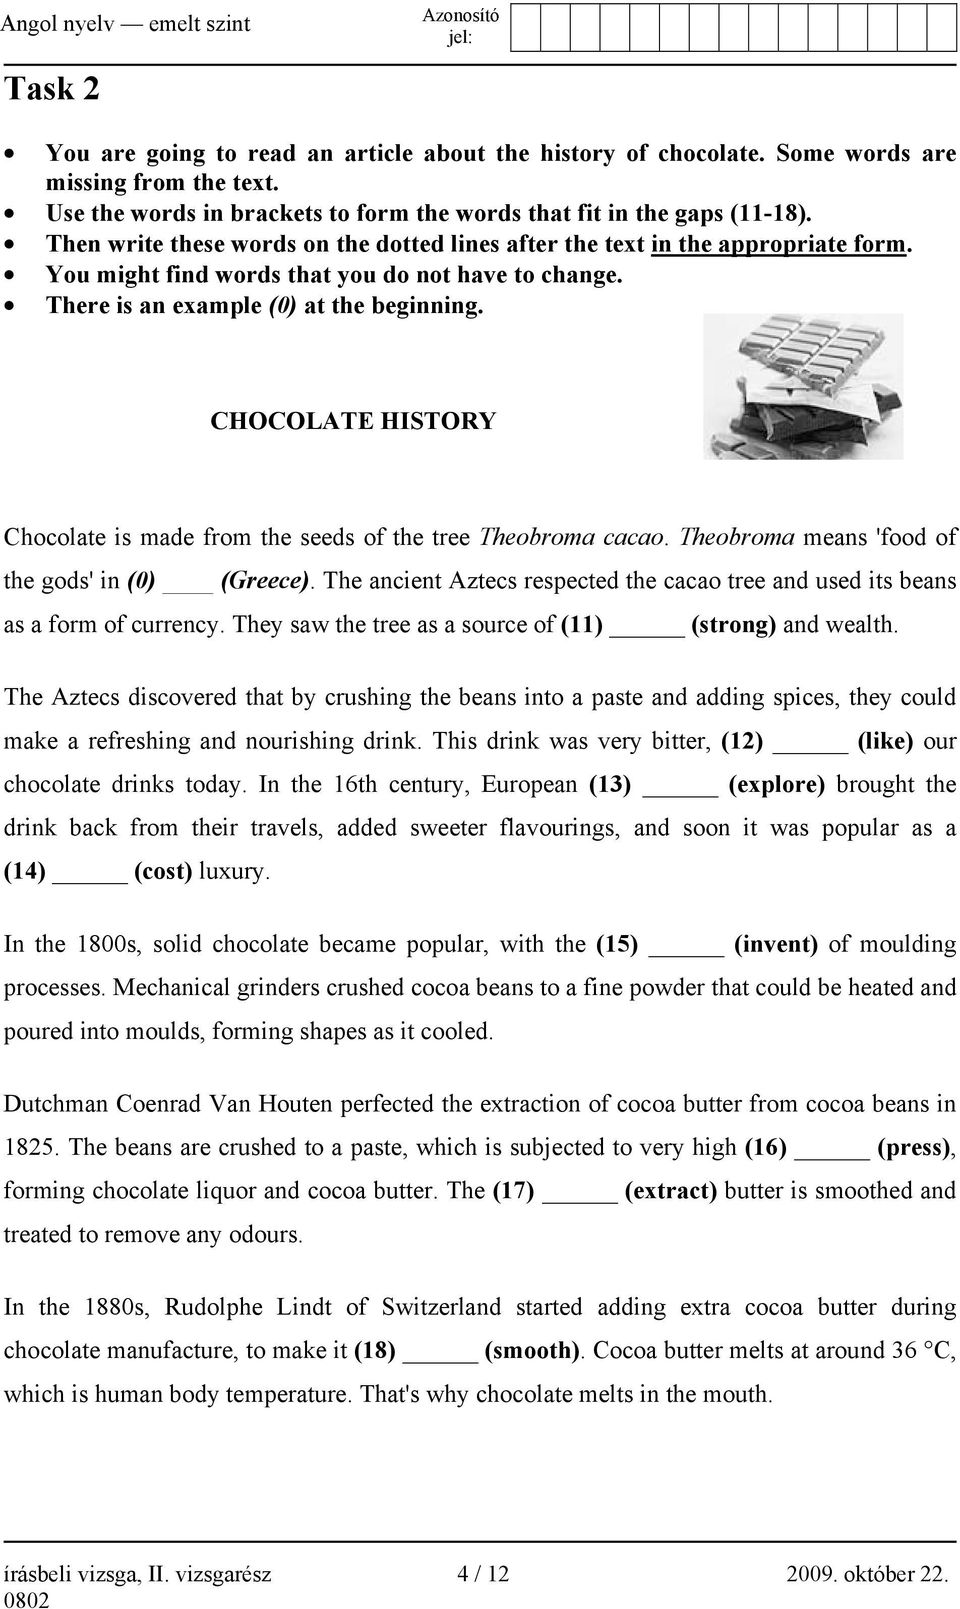 CHOCOLATE HISTORY Chocolate is made from the seeds of the tree Theobroma cacao. Theobroma means 'food of the gods' in (0) (Greece).